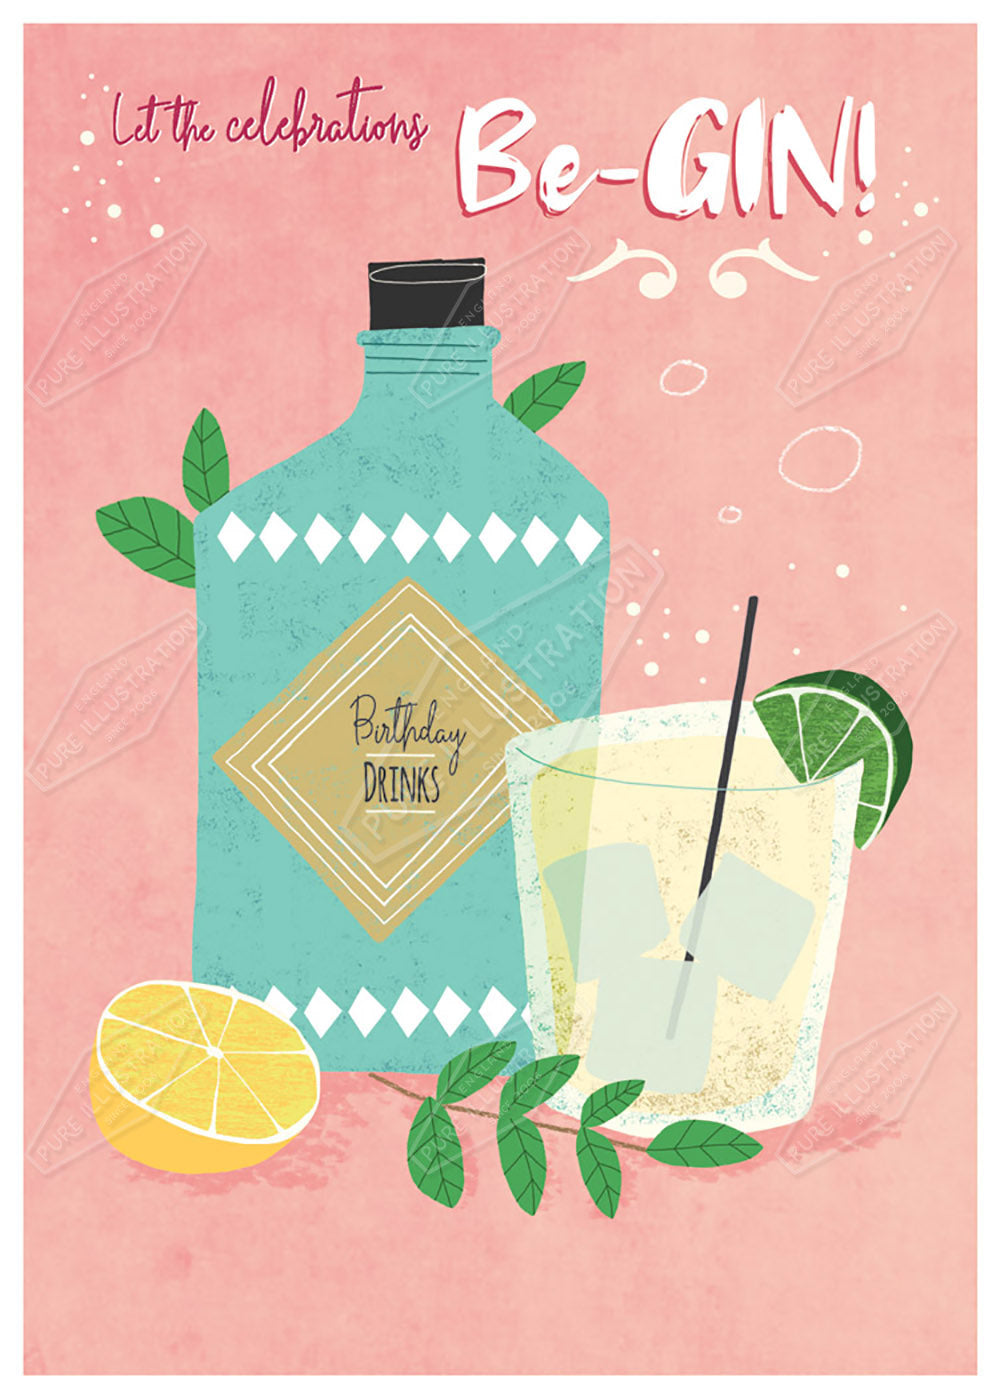 Gin Party Greeting Card Design by Cory Reid for Pure Art Licensing Agency & Surface Design Studio